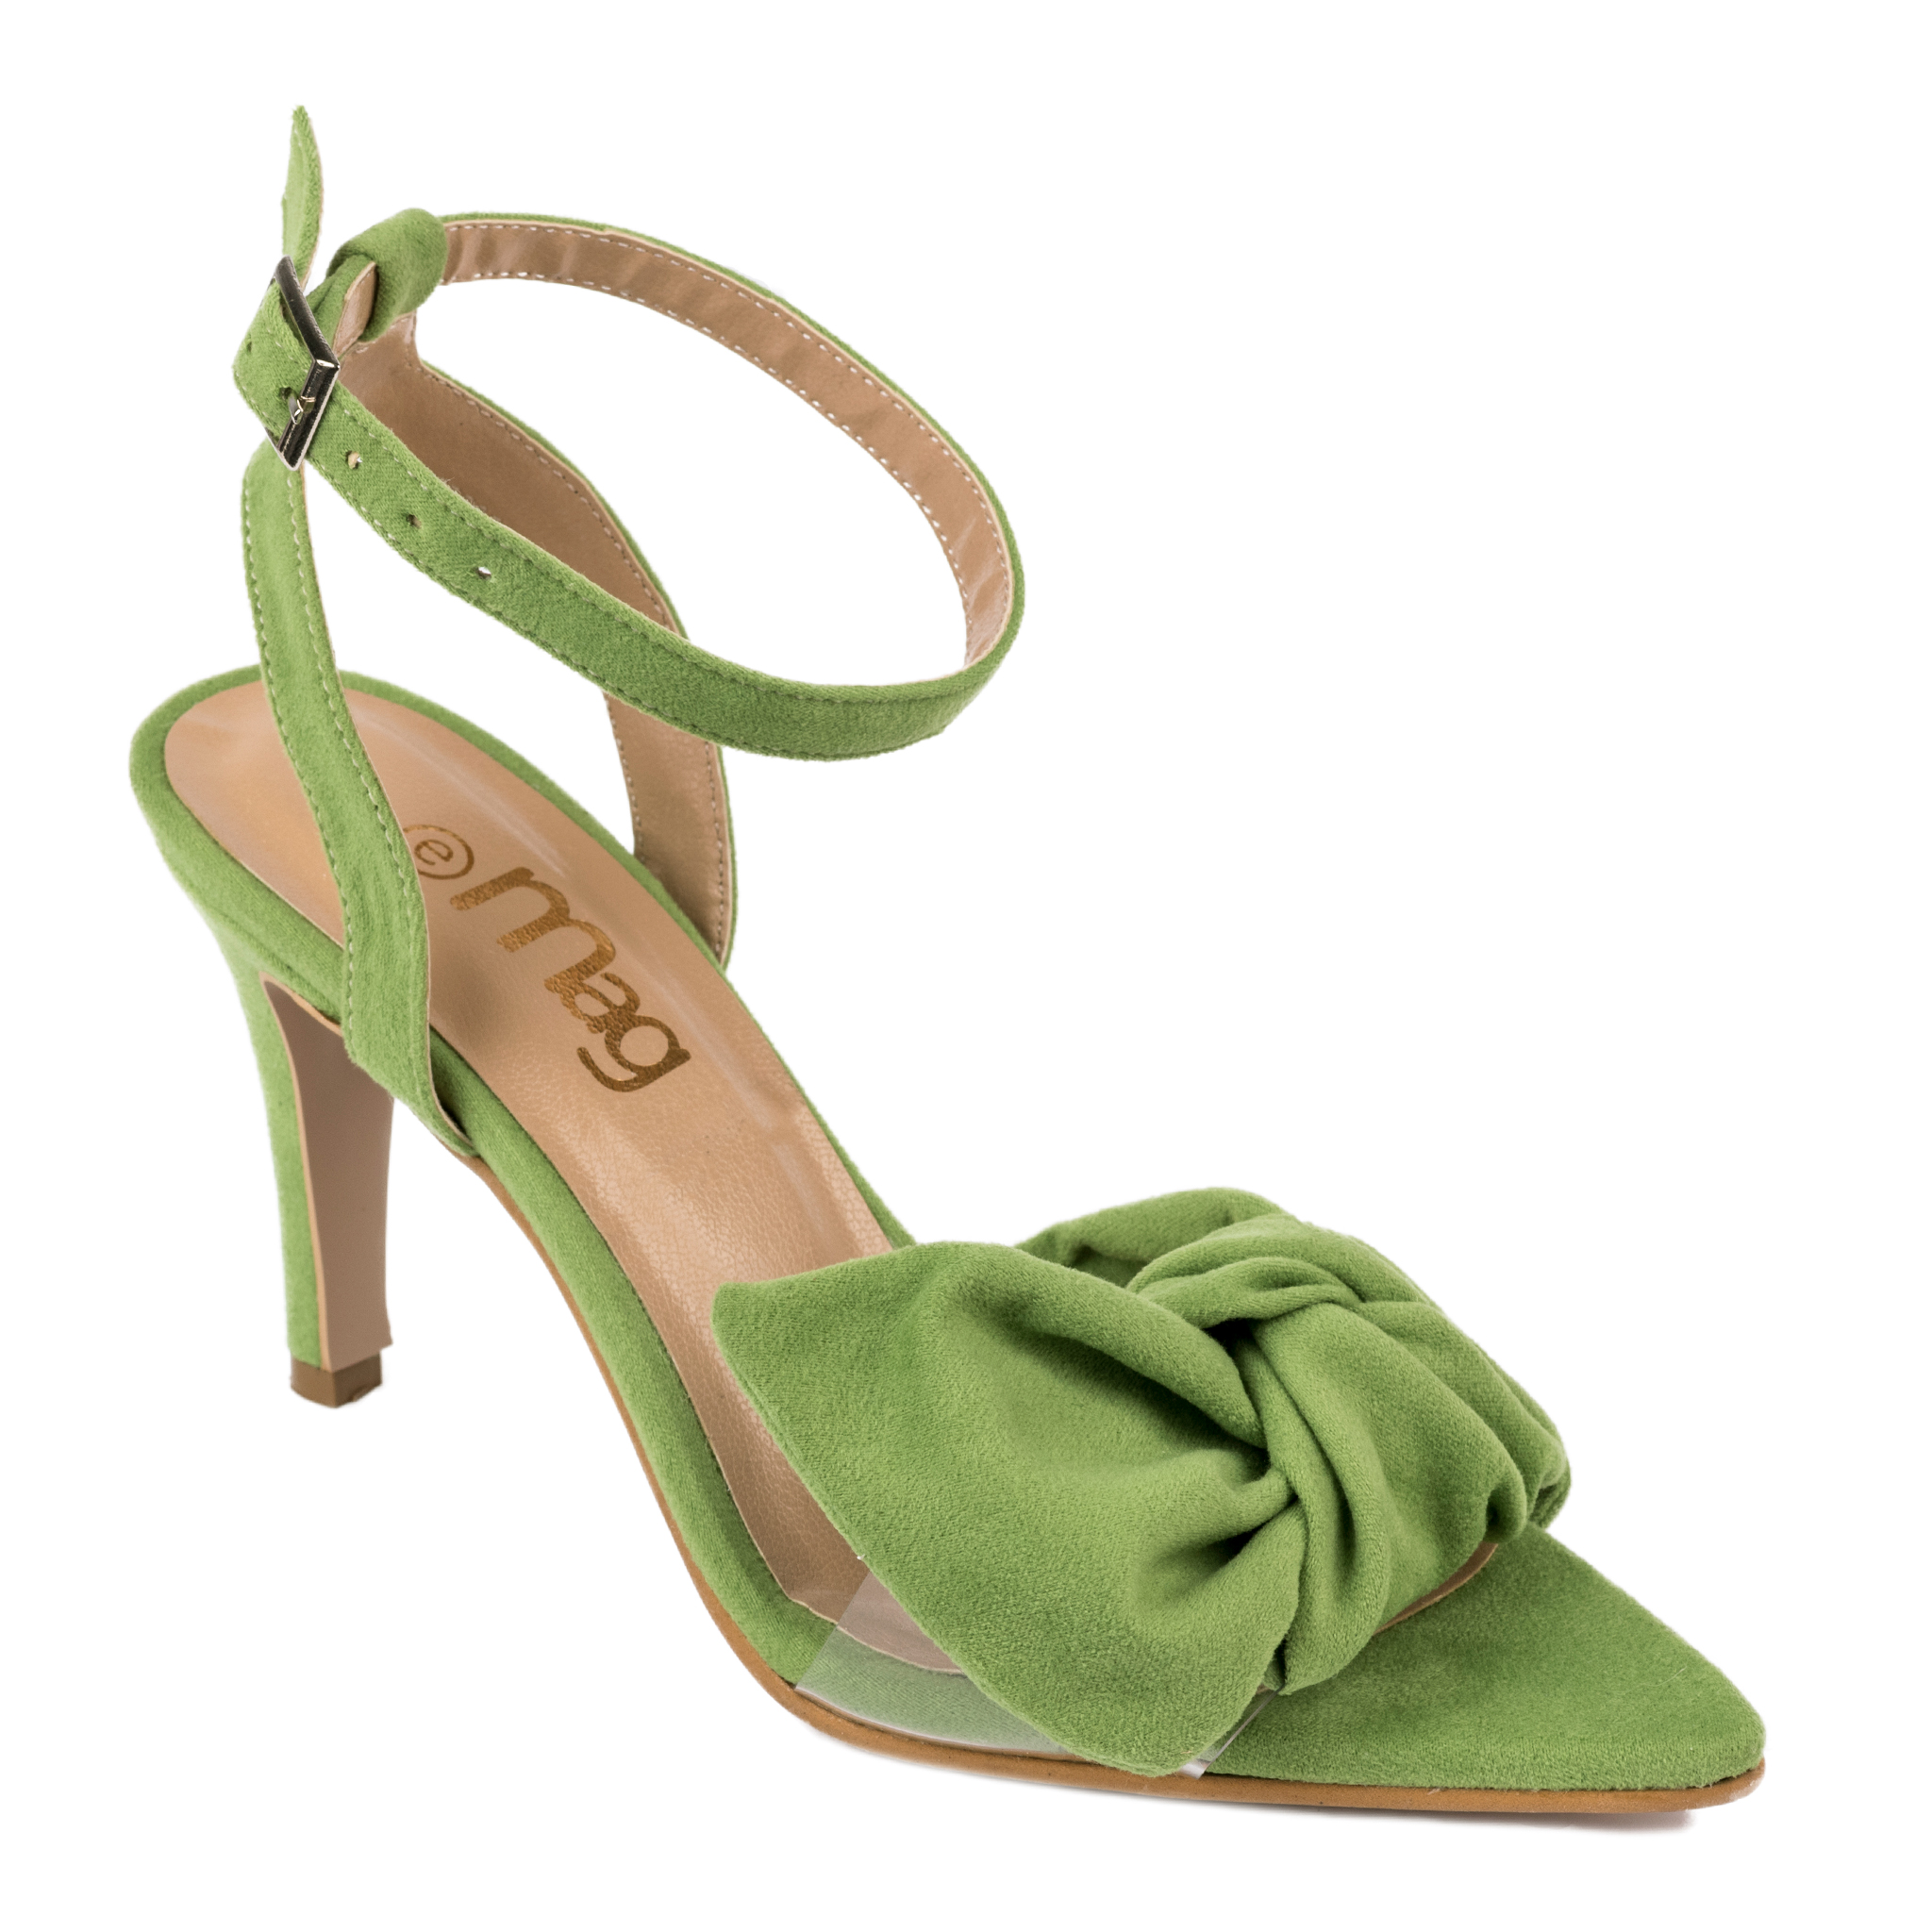 VELOUR SPIKE SANDALS THIN HEEL WITH BOW - GREEN